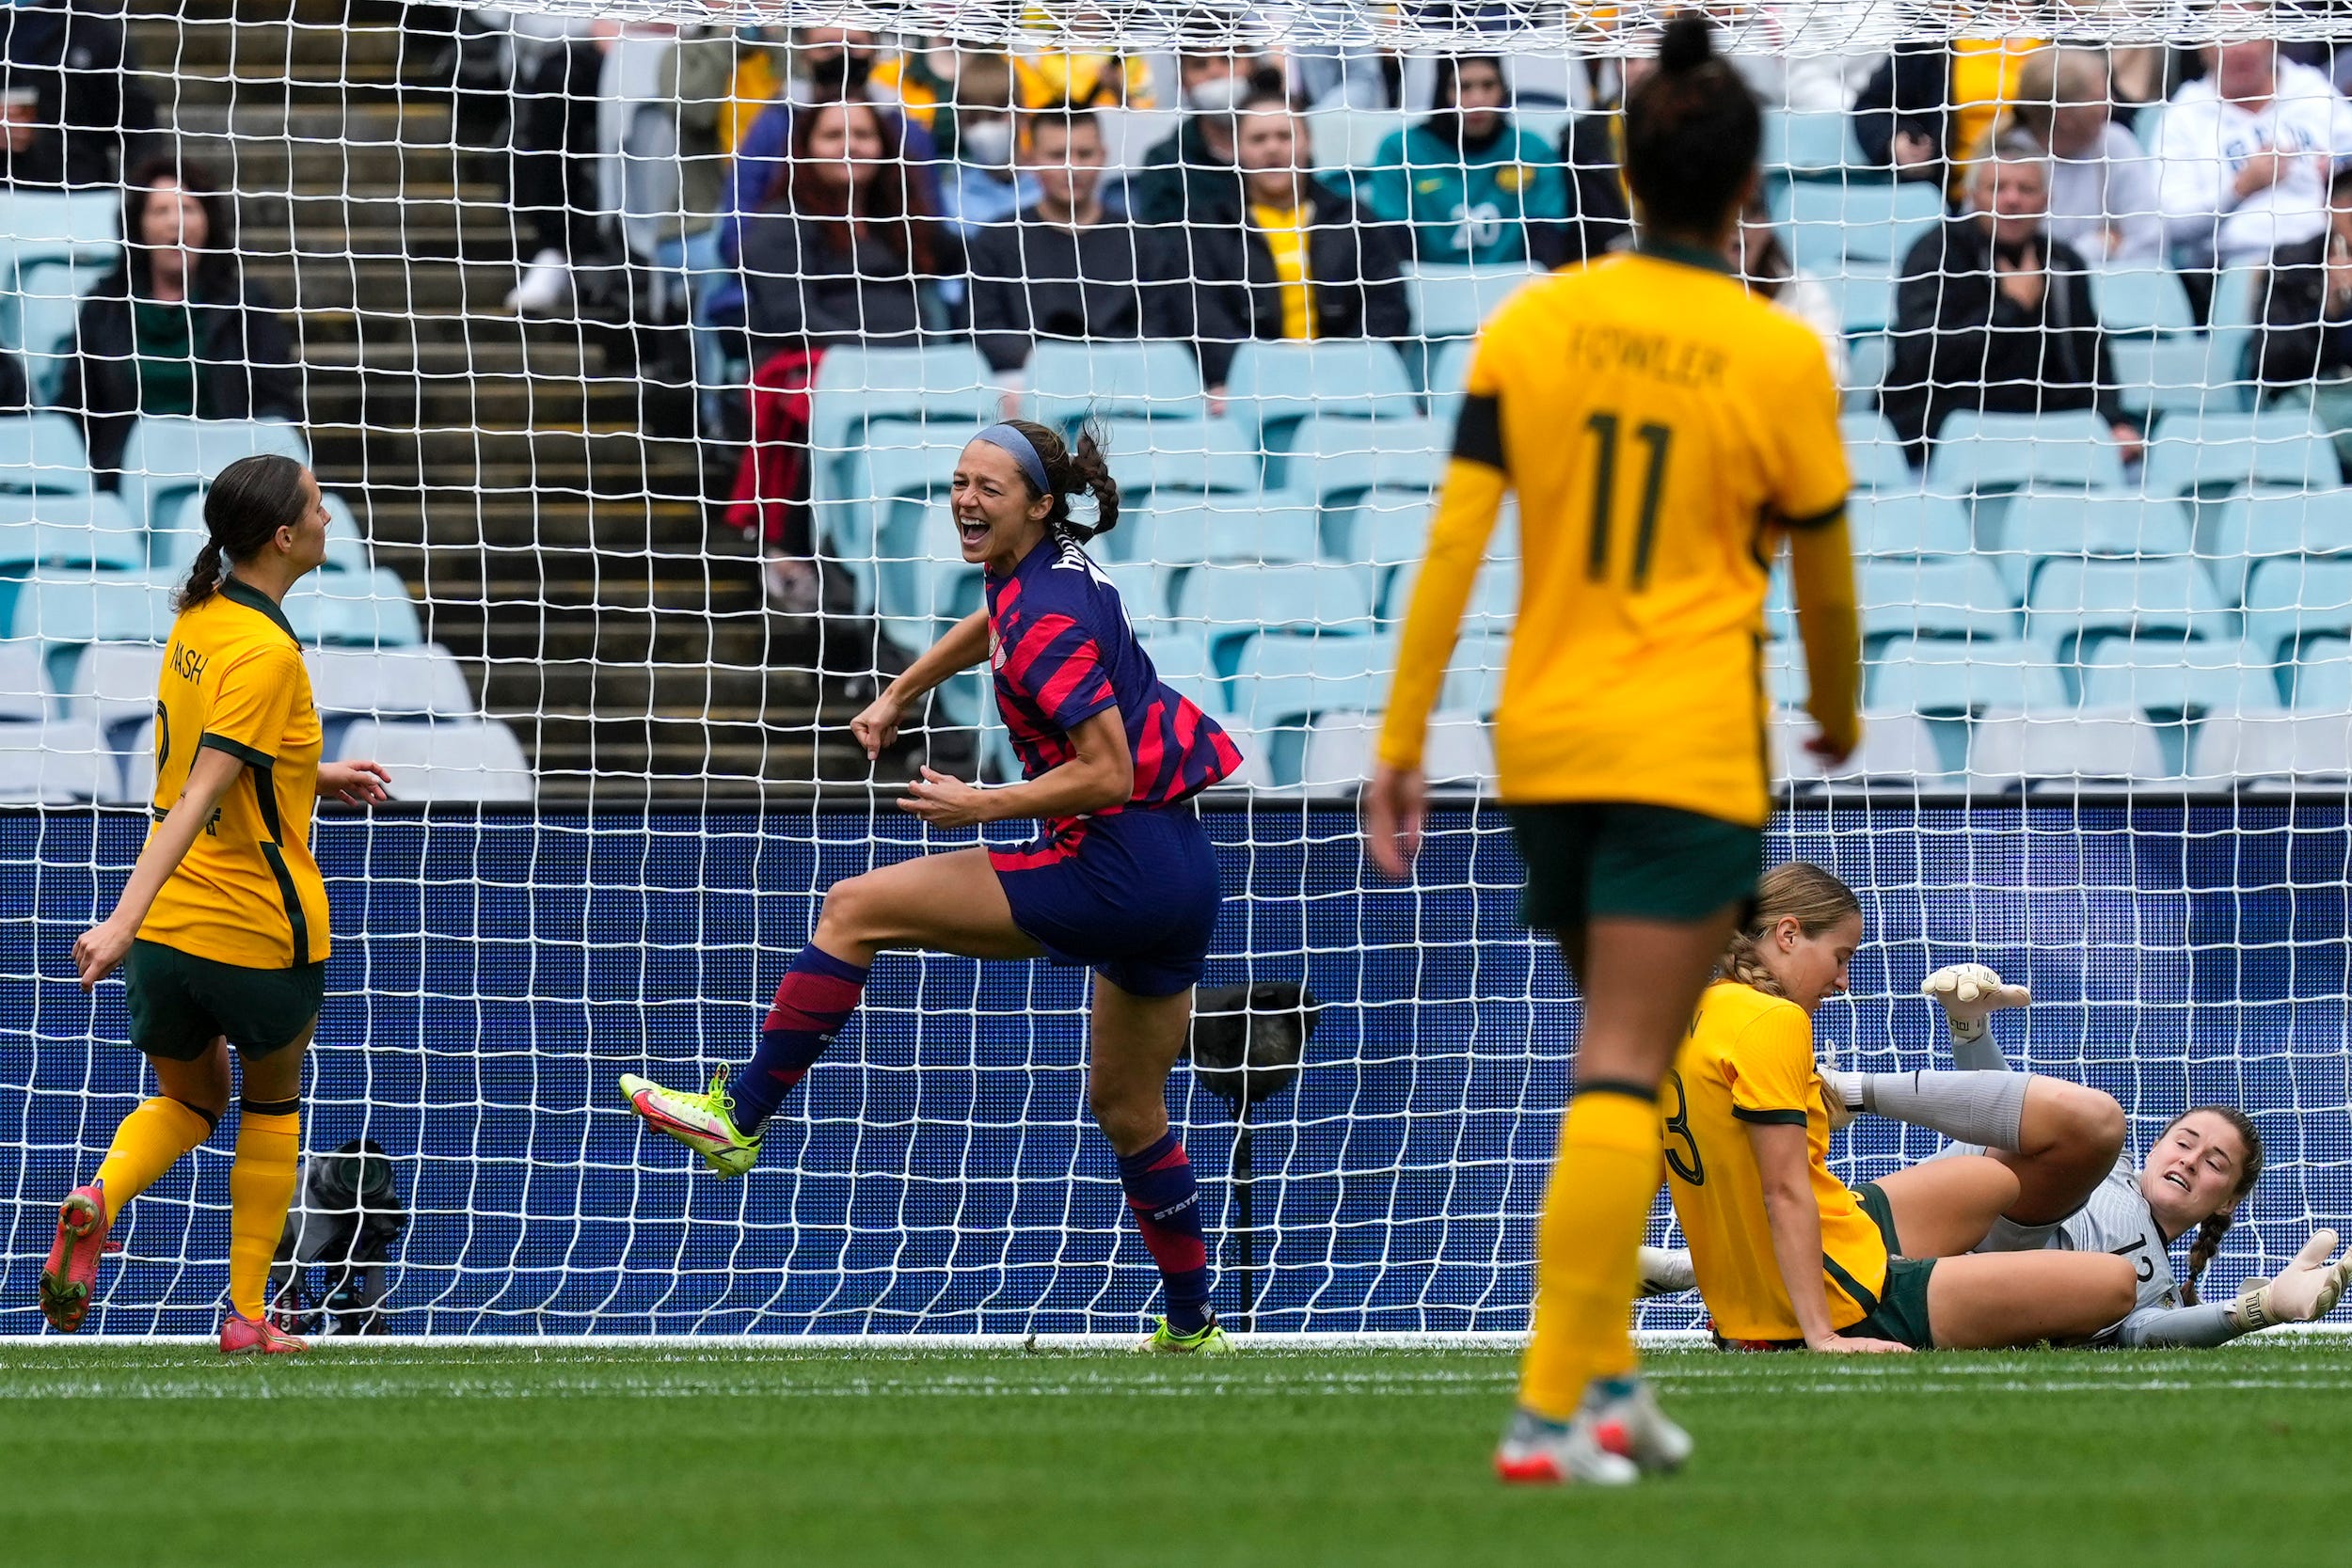 Ashley Hatch reacts to scoring her first-ever USWNT goal.